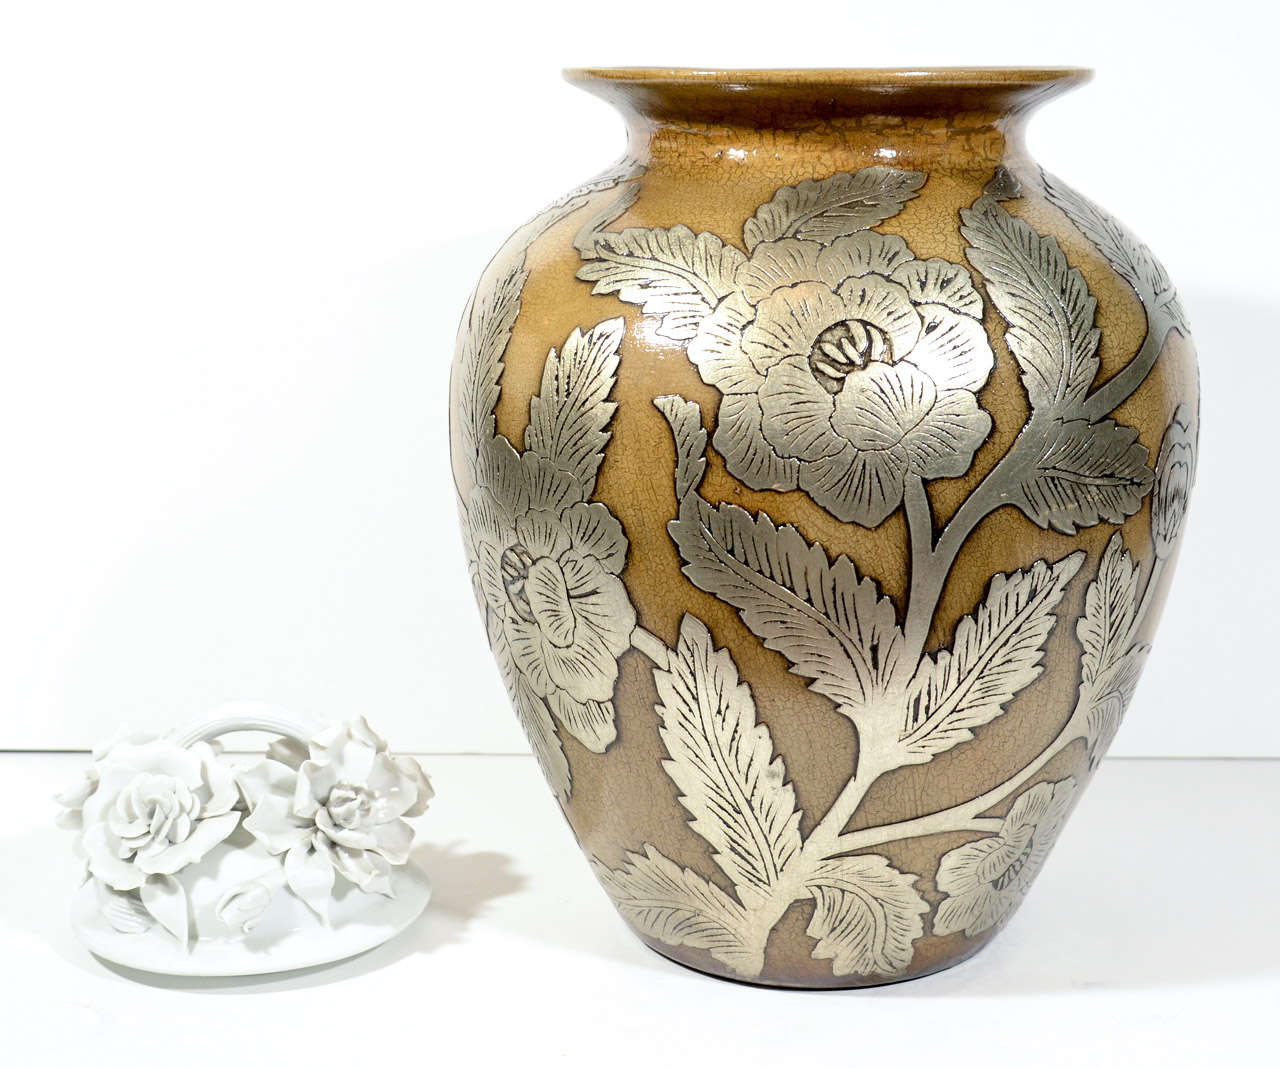 Ceramic Pottery Urn Vase with Relief Designs in Silver Leaf 5